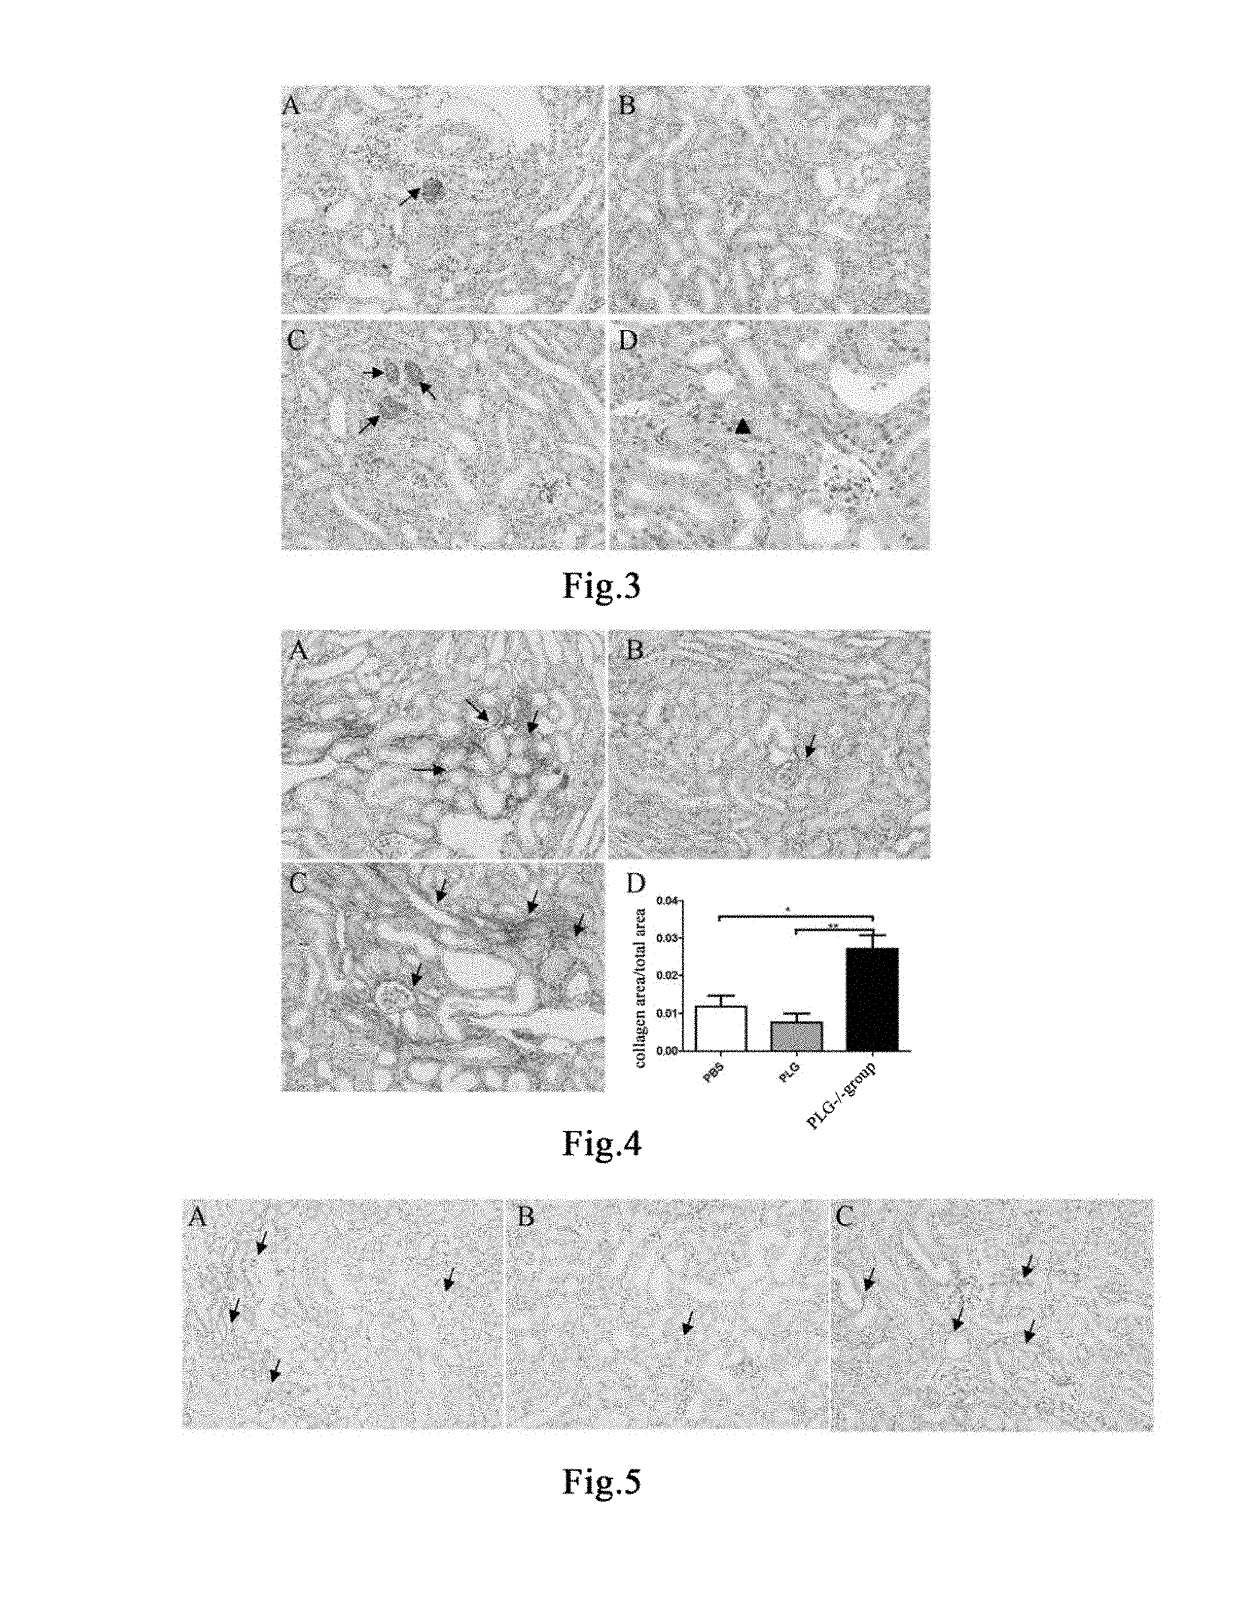 Method for preventing and treating drug-induced renal injury